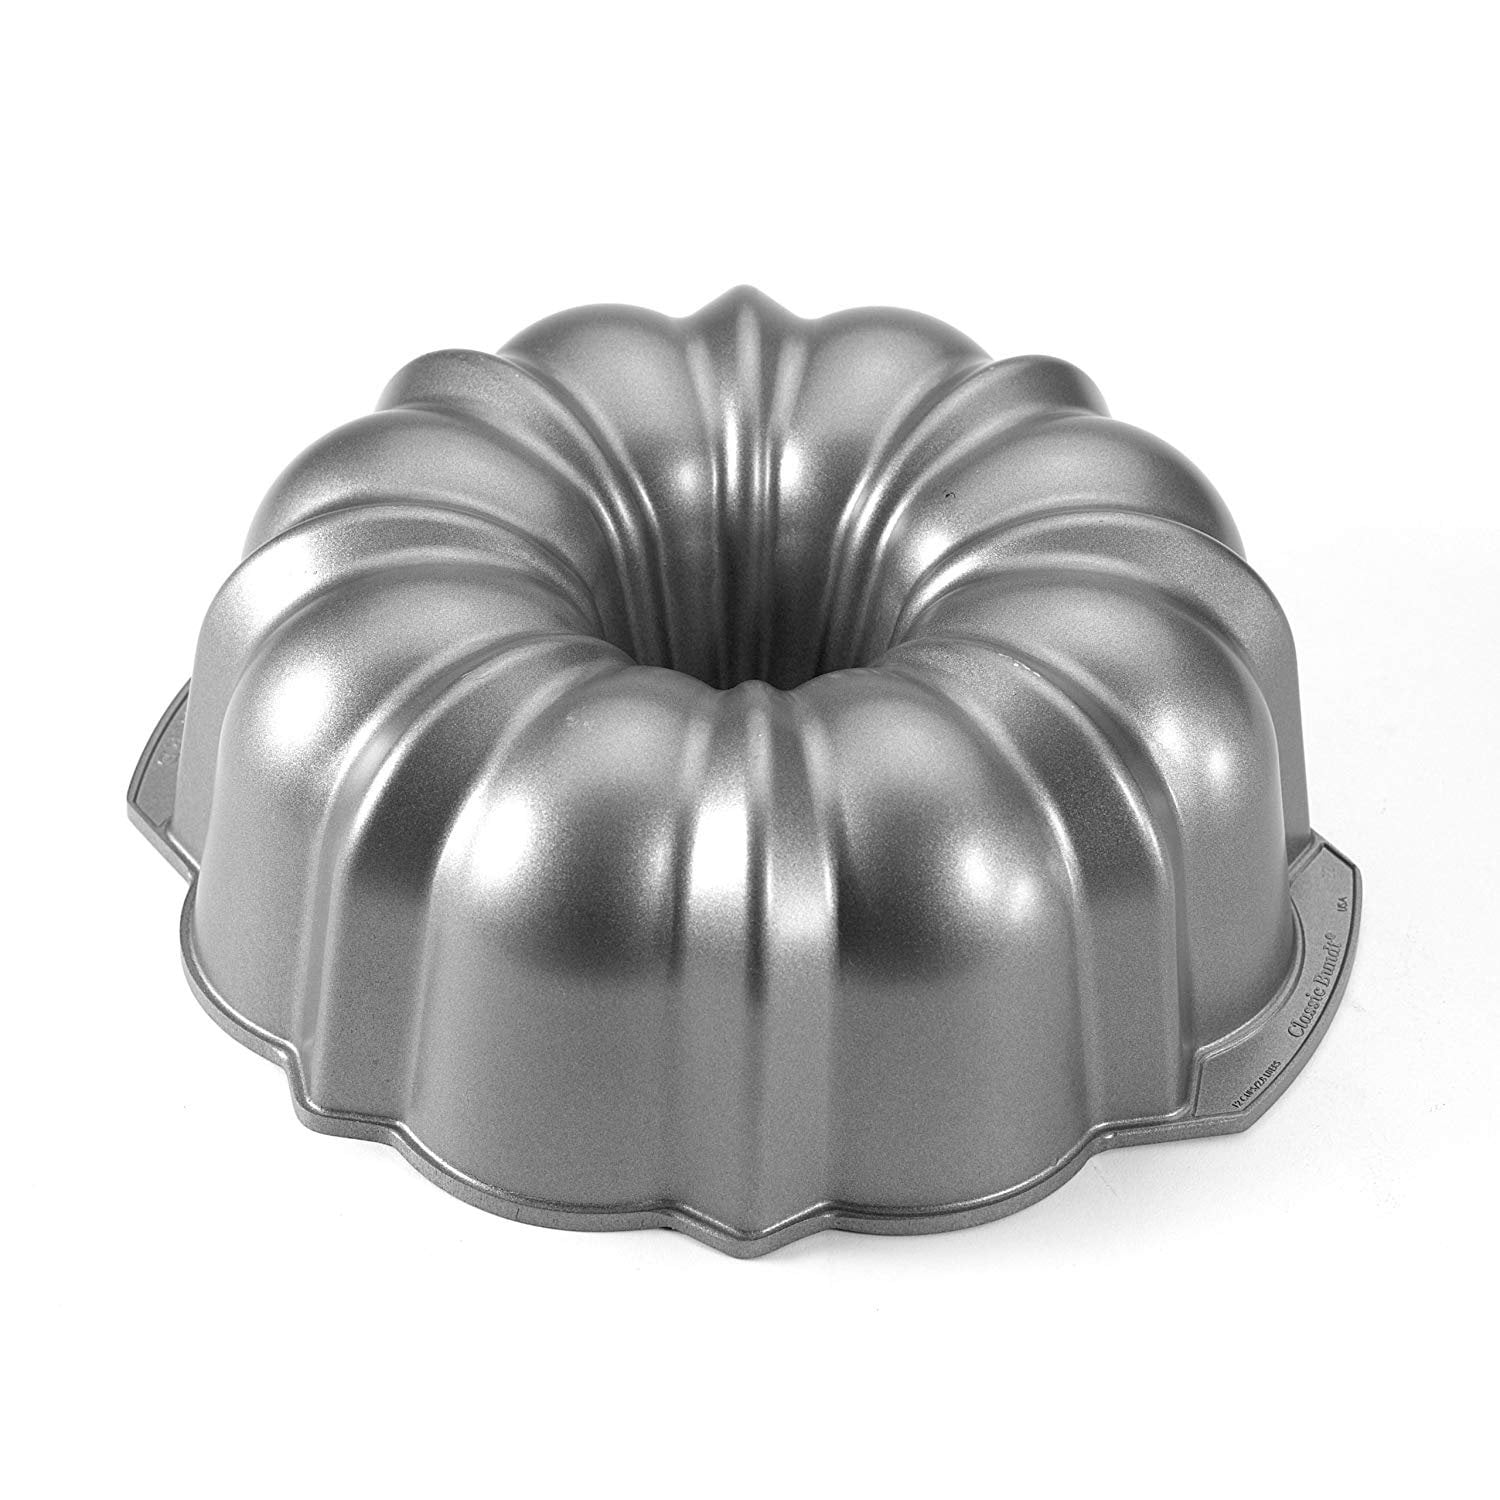 Nordic Ware 2006 60th Anniversary Cast Aluminum 10-15 Cup Bundt Pan -  household items - by owner - housewares sale 